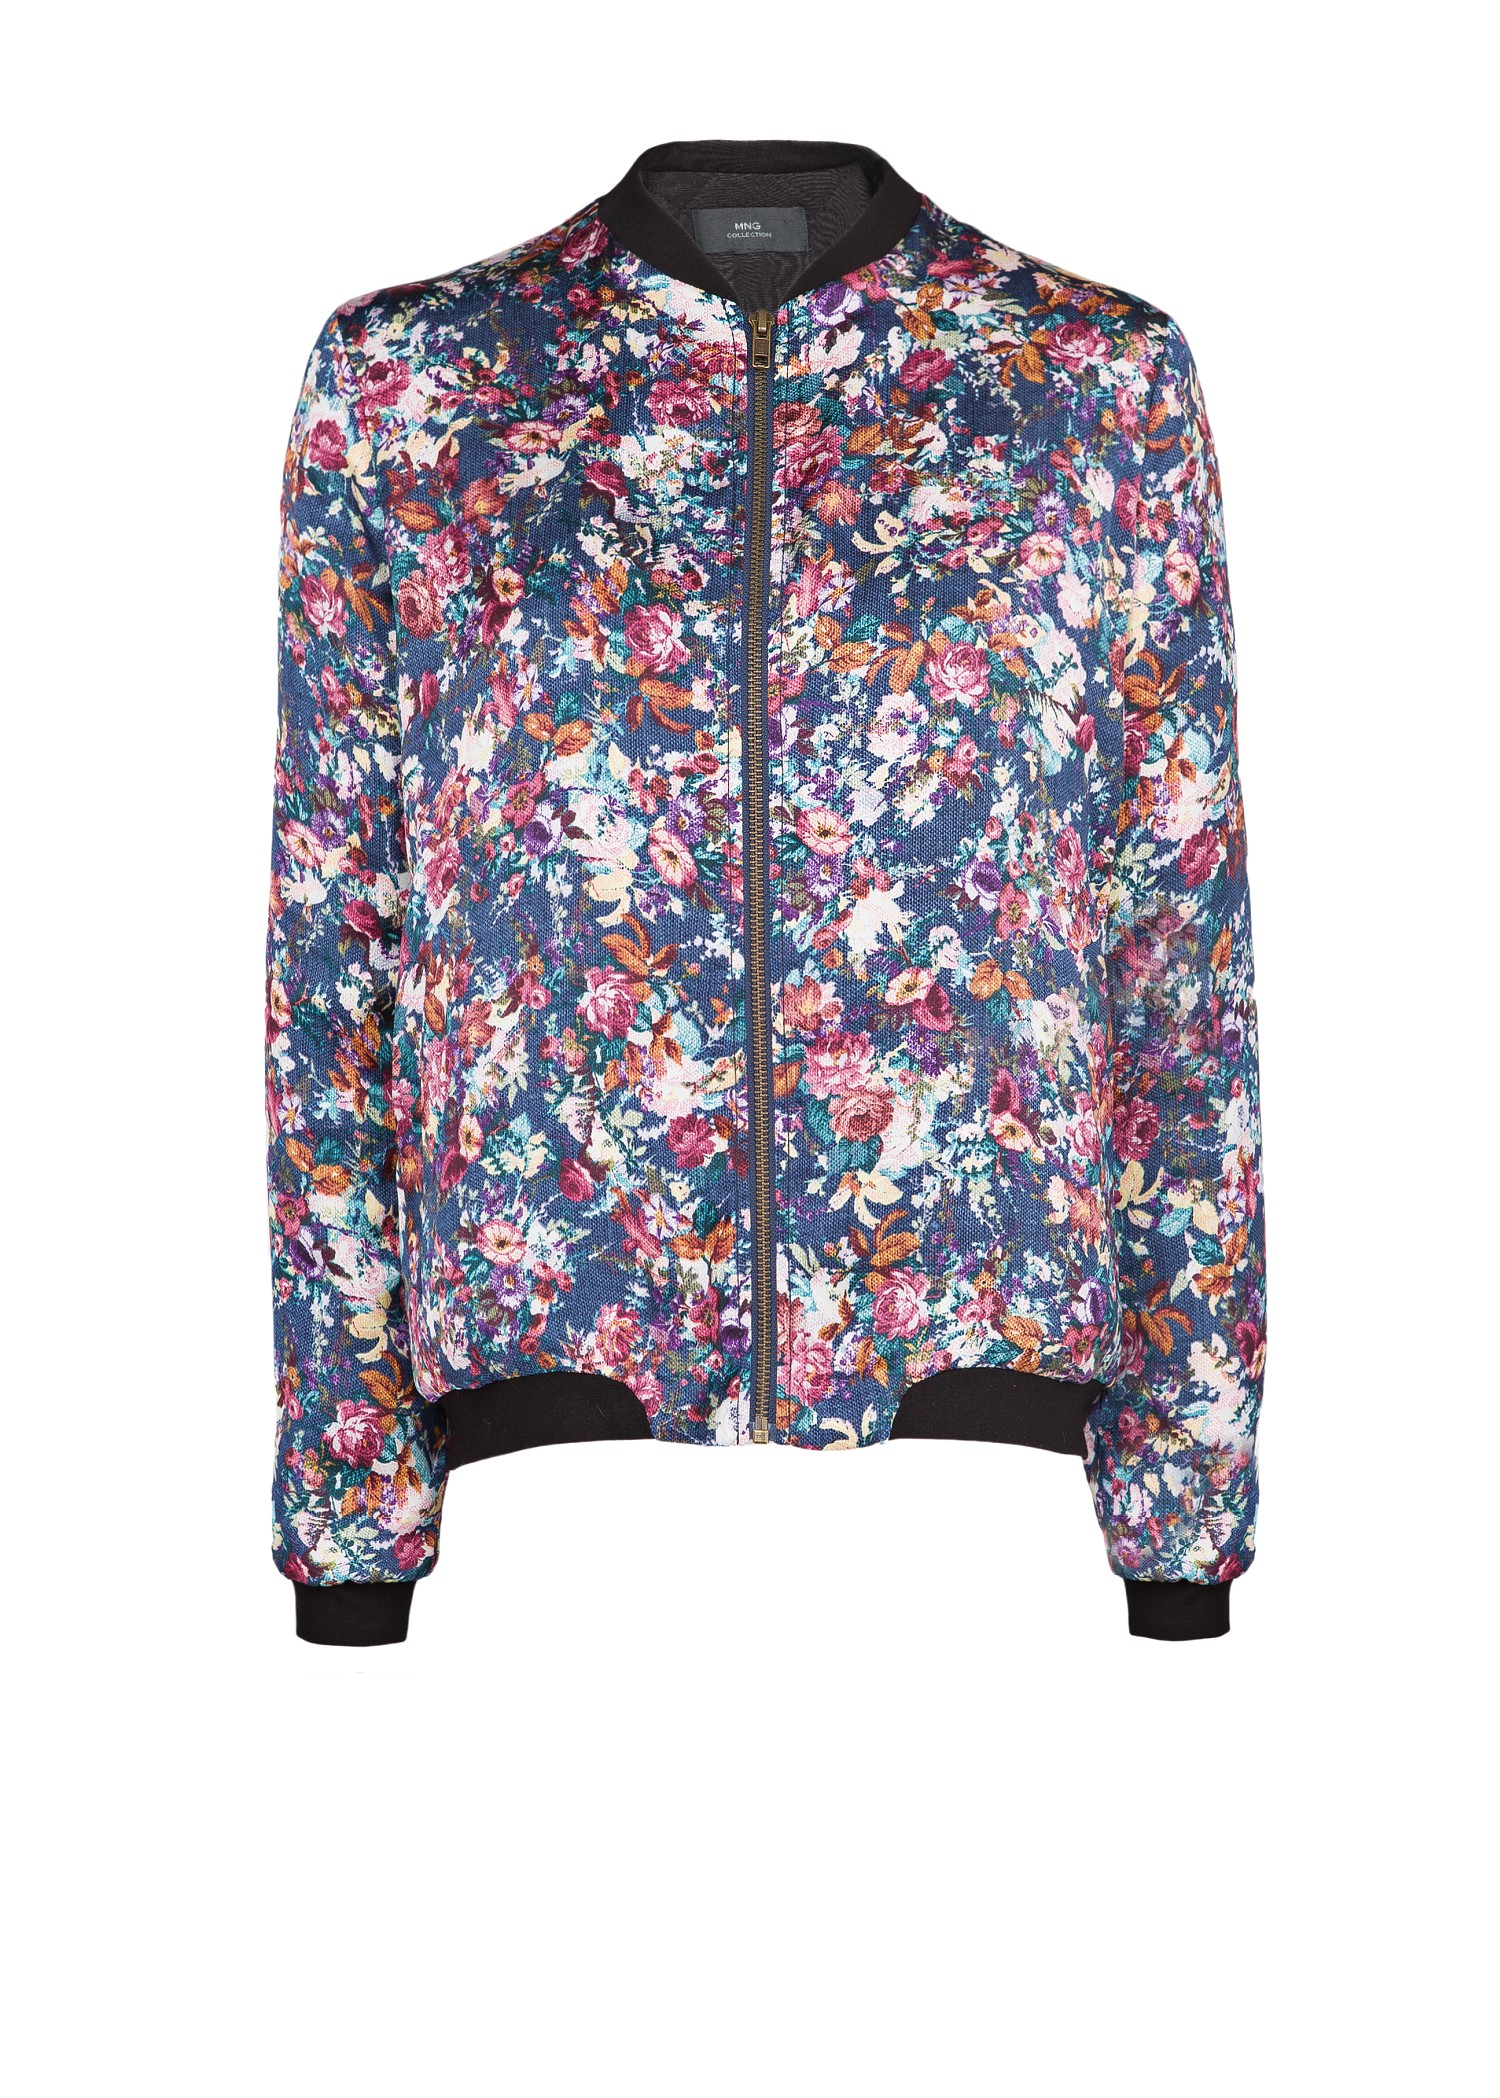 Lyst - Mango Floral Print Bomber Jacket in Green